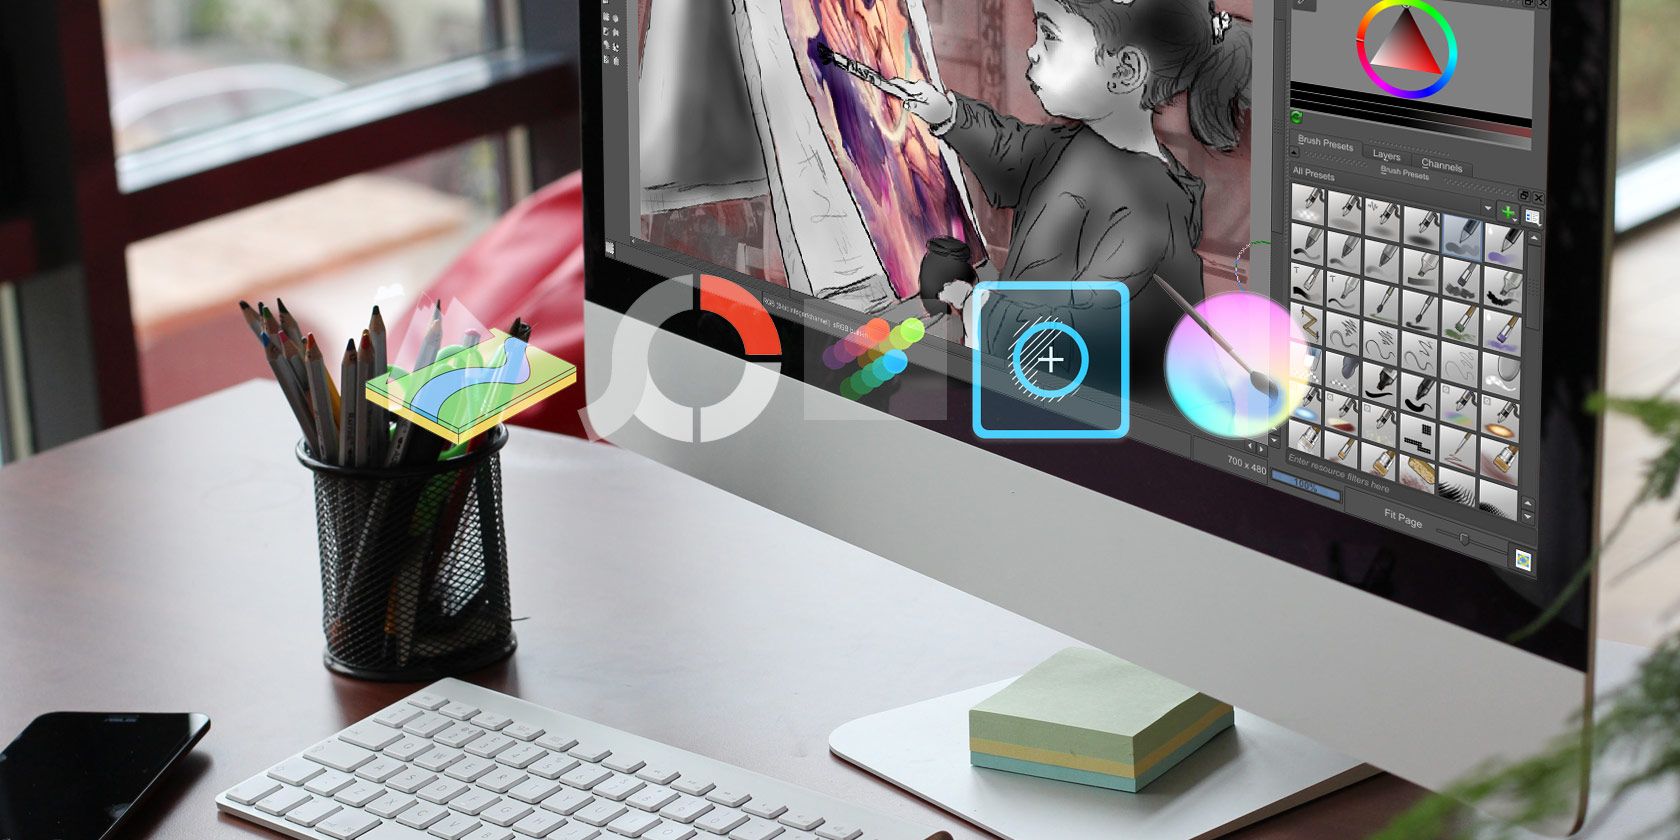 good photo editing apps for mac free